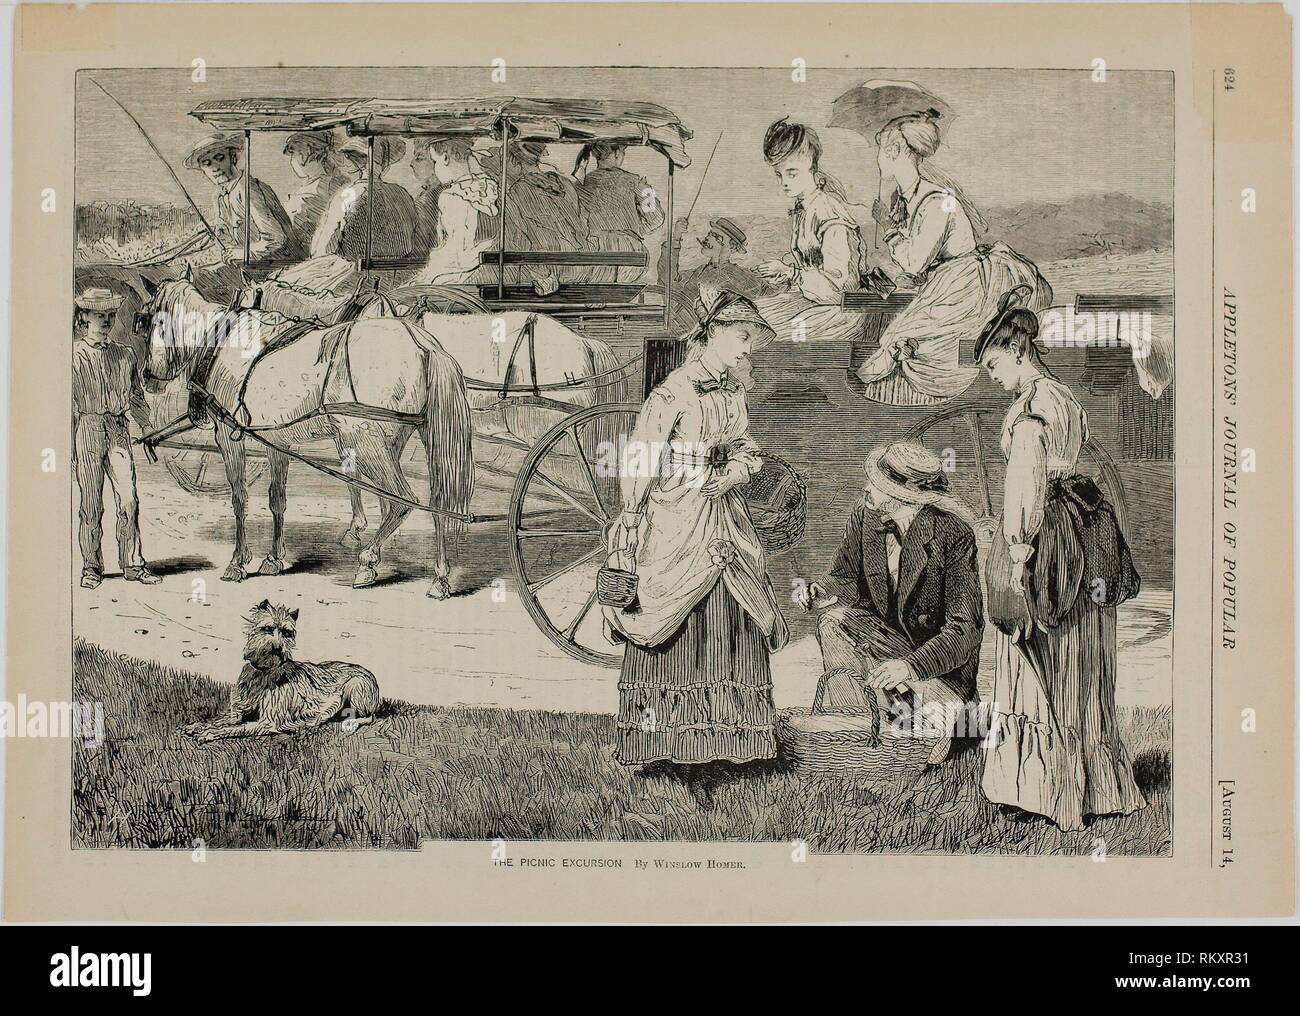 The Picnic Excursion - published August 14, 1869 - Winslow Homer (American, 1836-1910) published by Appletons' Journal (American, 1869-1881) - Stock Photo